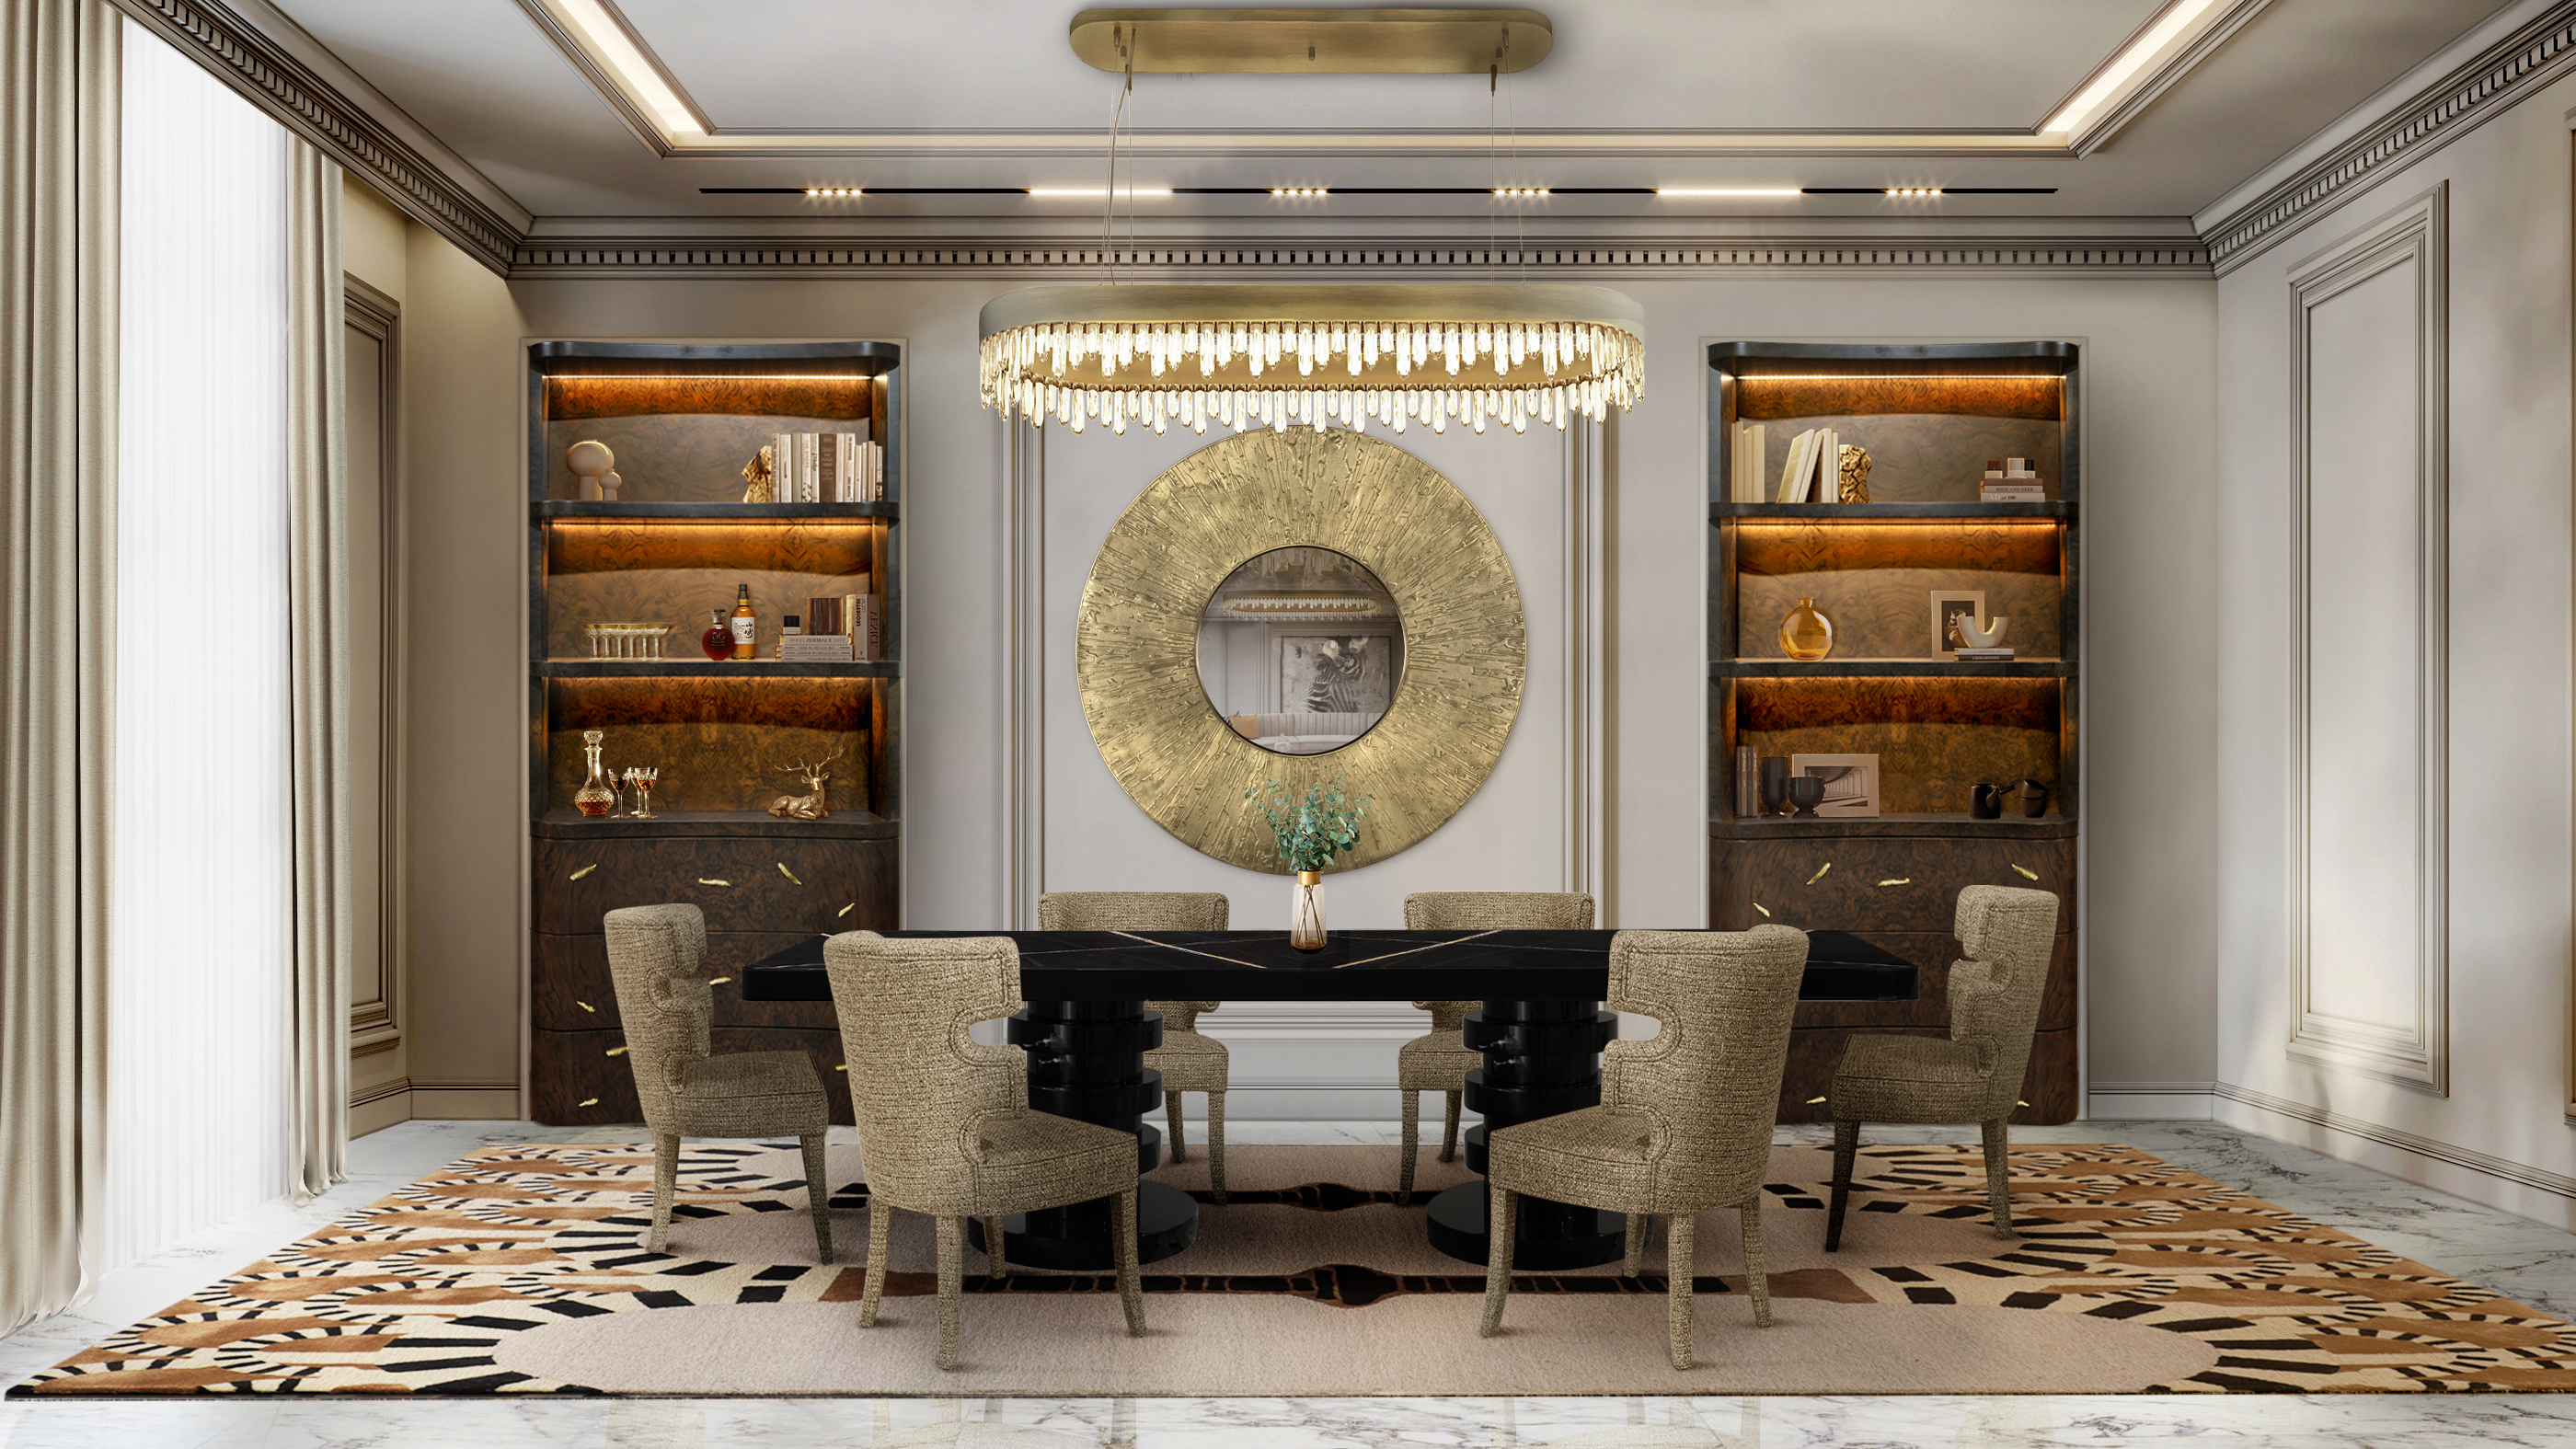 Elegant Dining Room With Golden Accents - Home'Society